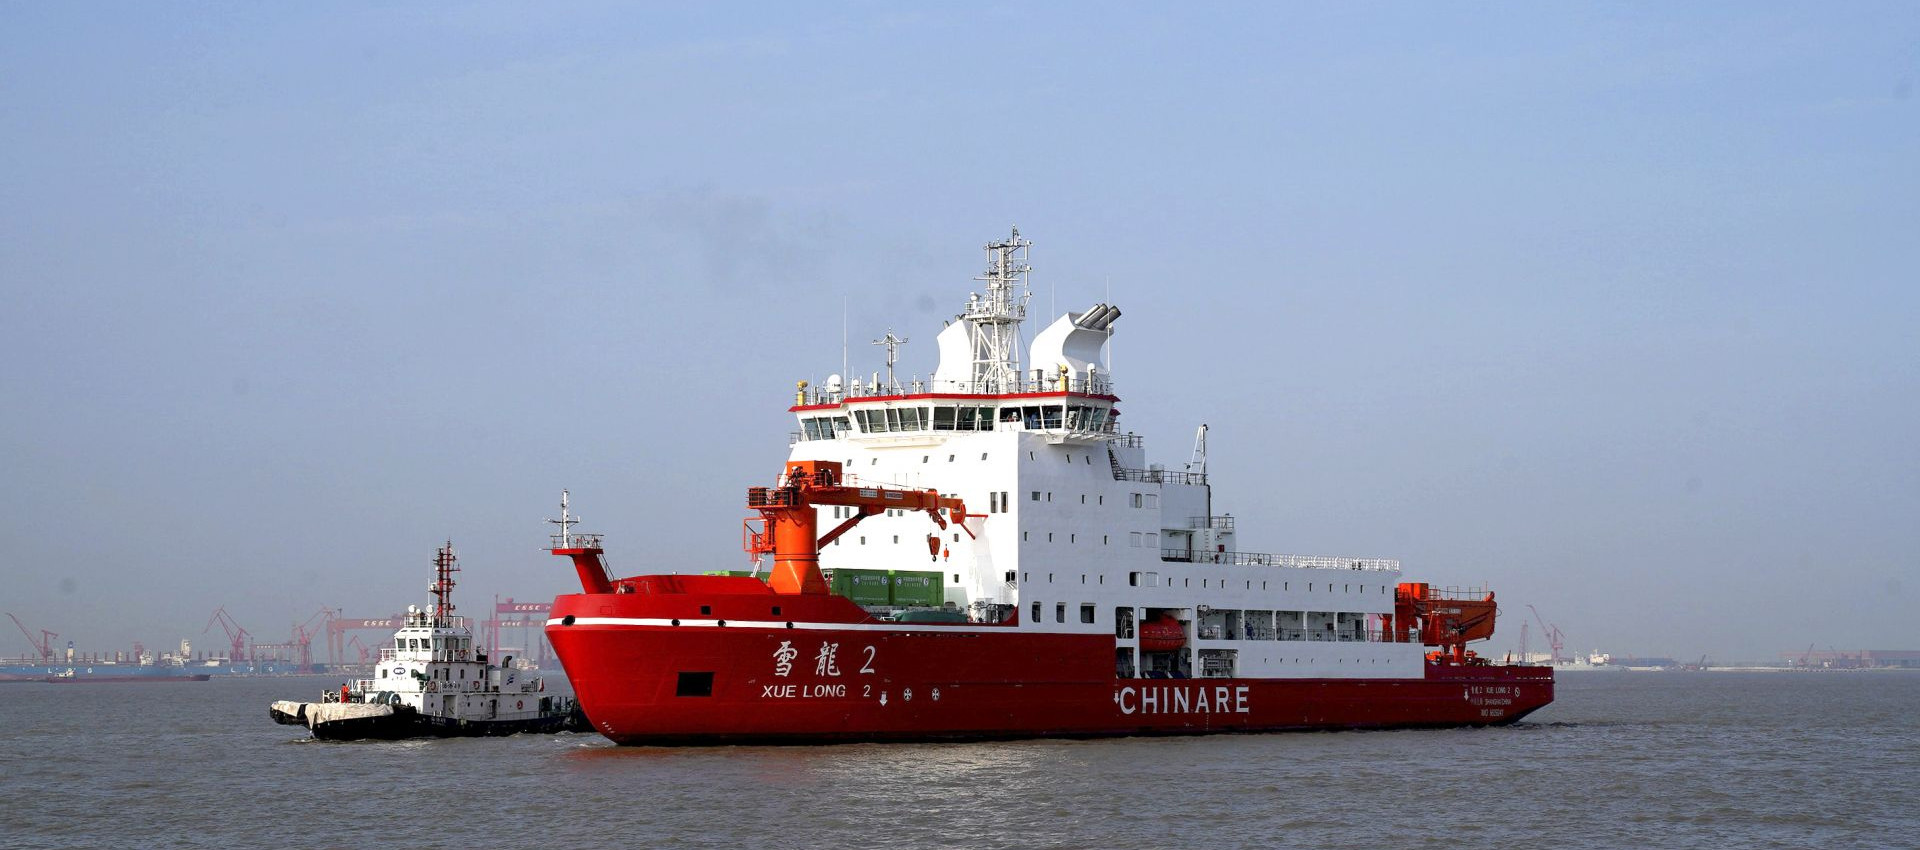 Latest company case about Longteng welding wire was used on the Xuelong polar expedition ship